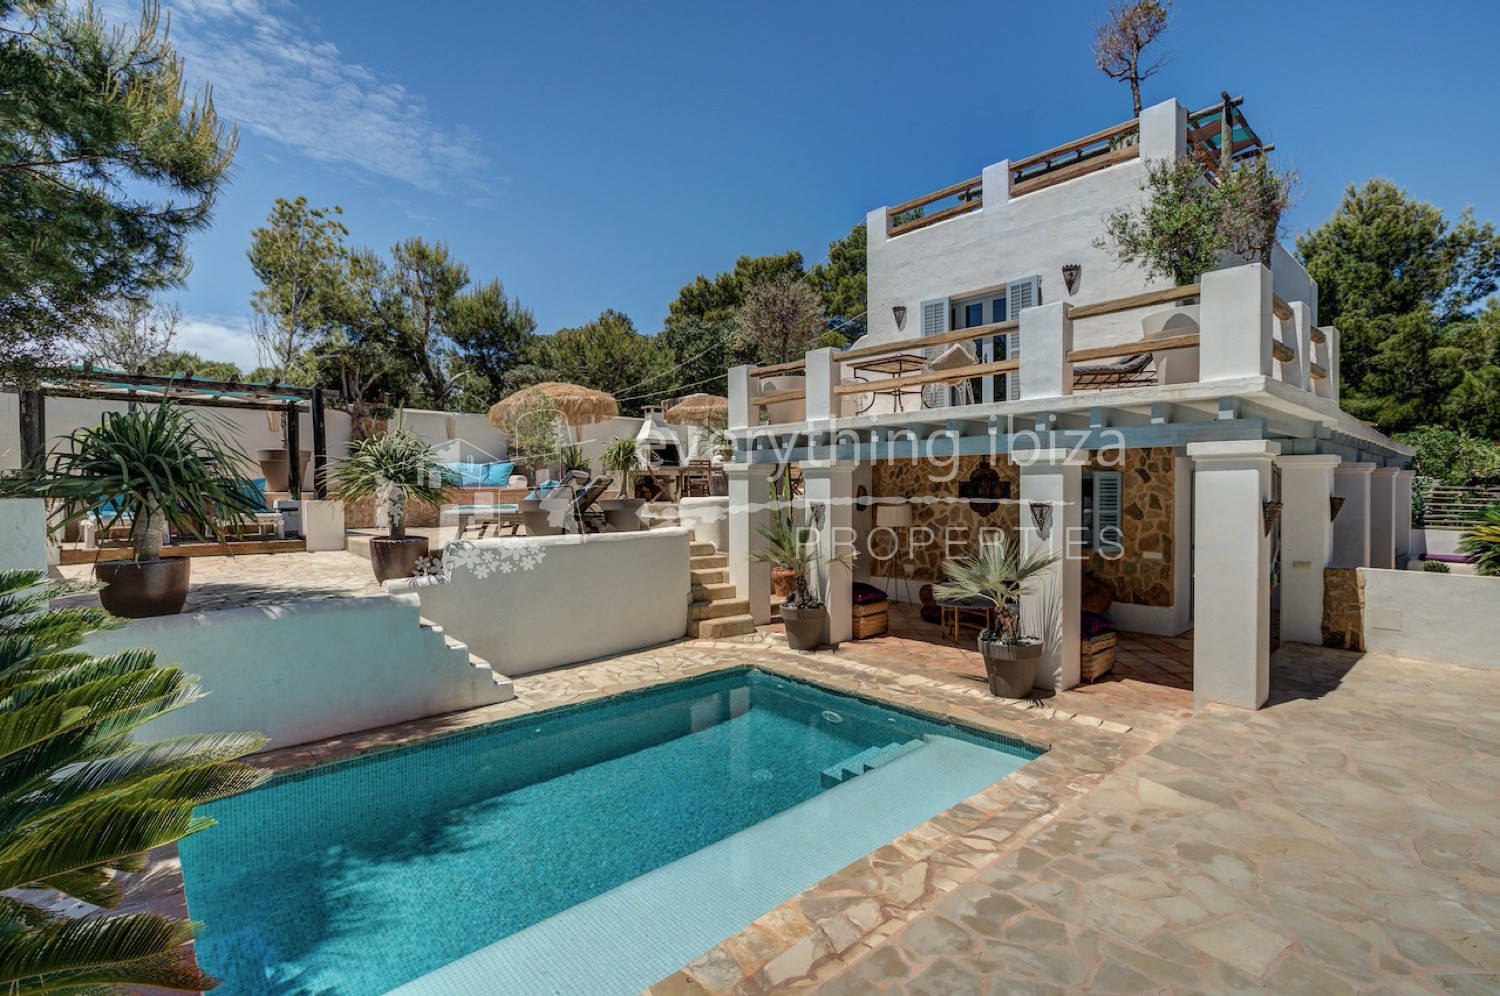 Magnificent villa with views, ref. 1267, for sale in Ibiza by everything ibiza Properties